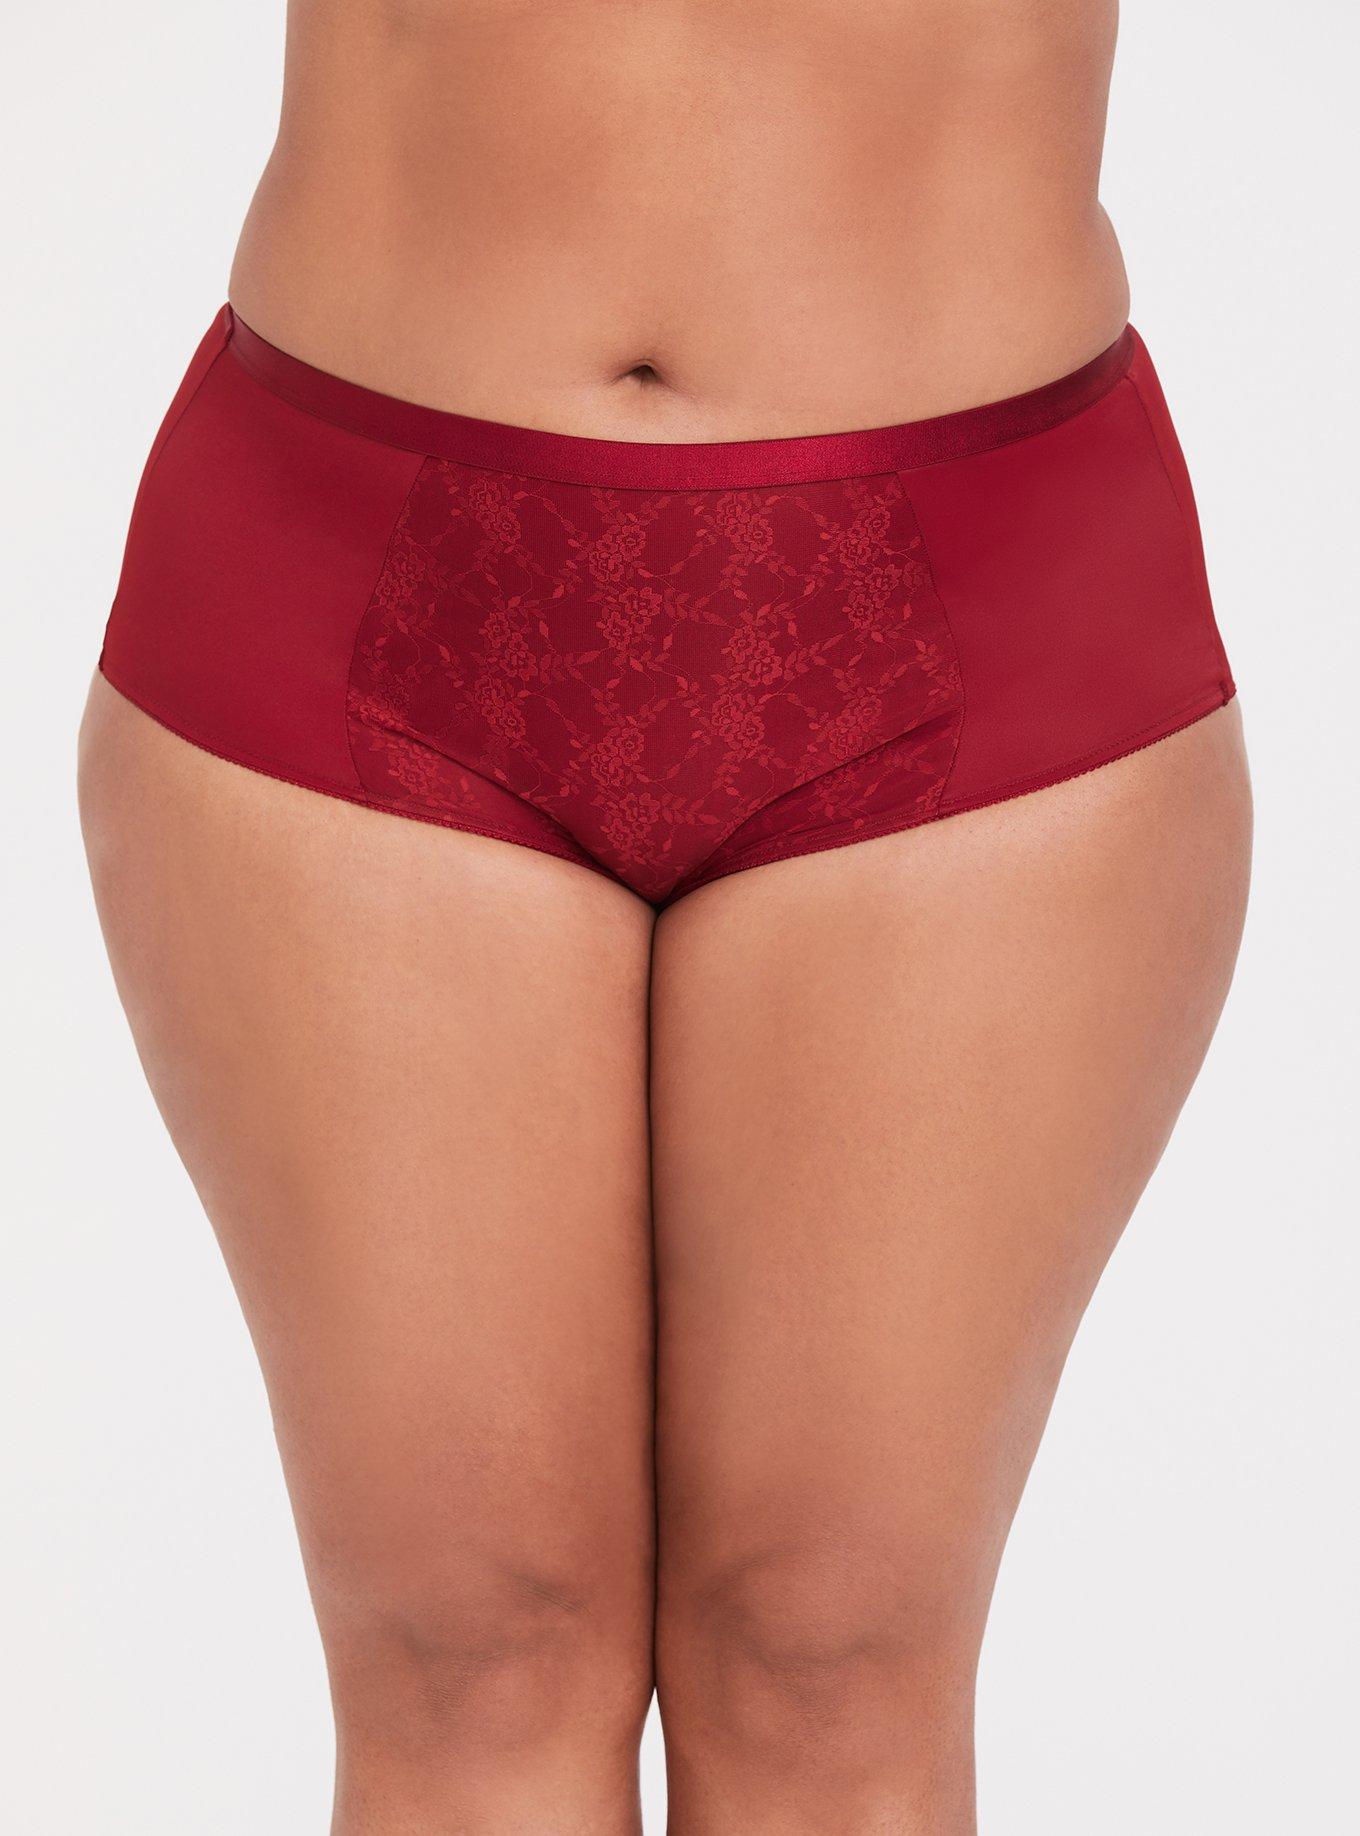 Smoothing Brief Panty – Her own words